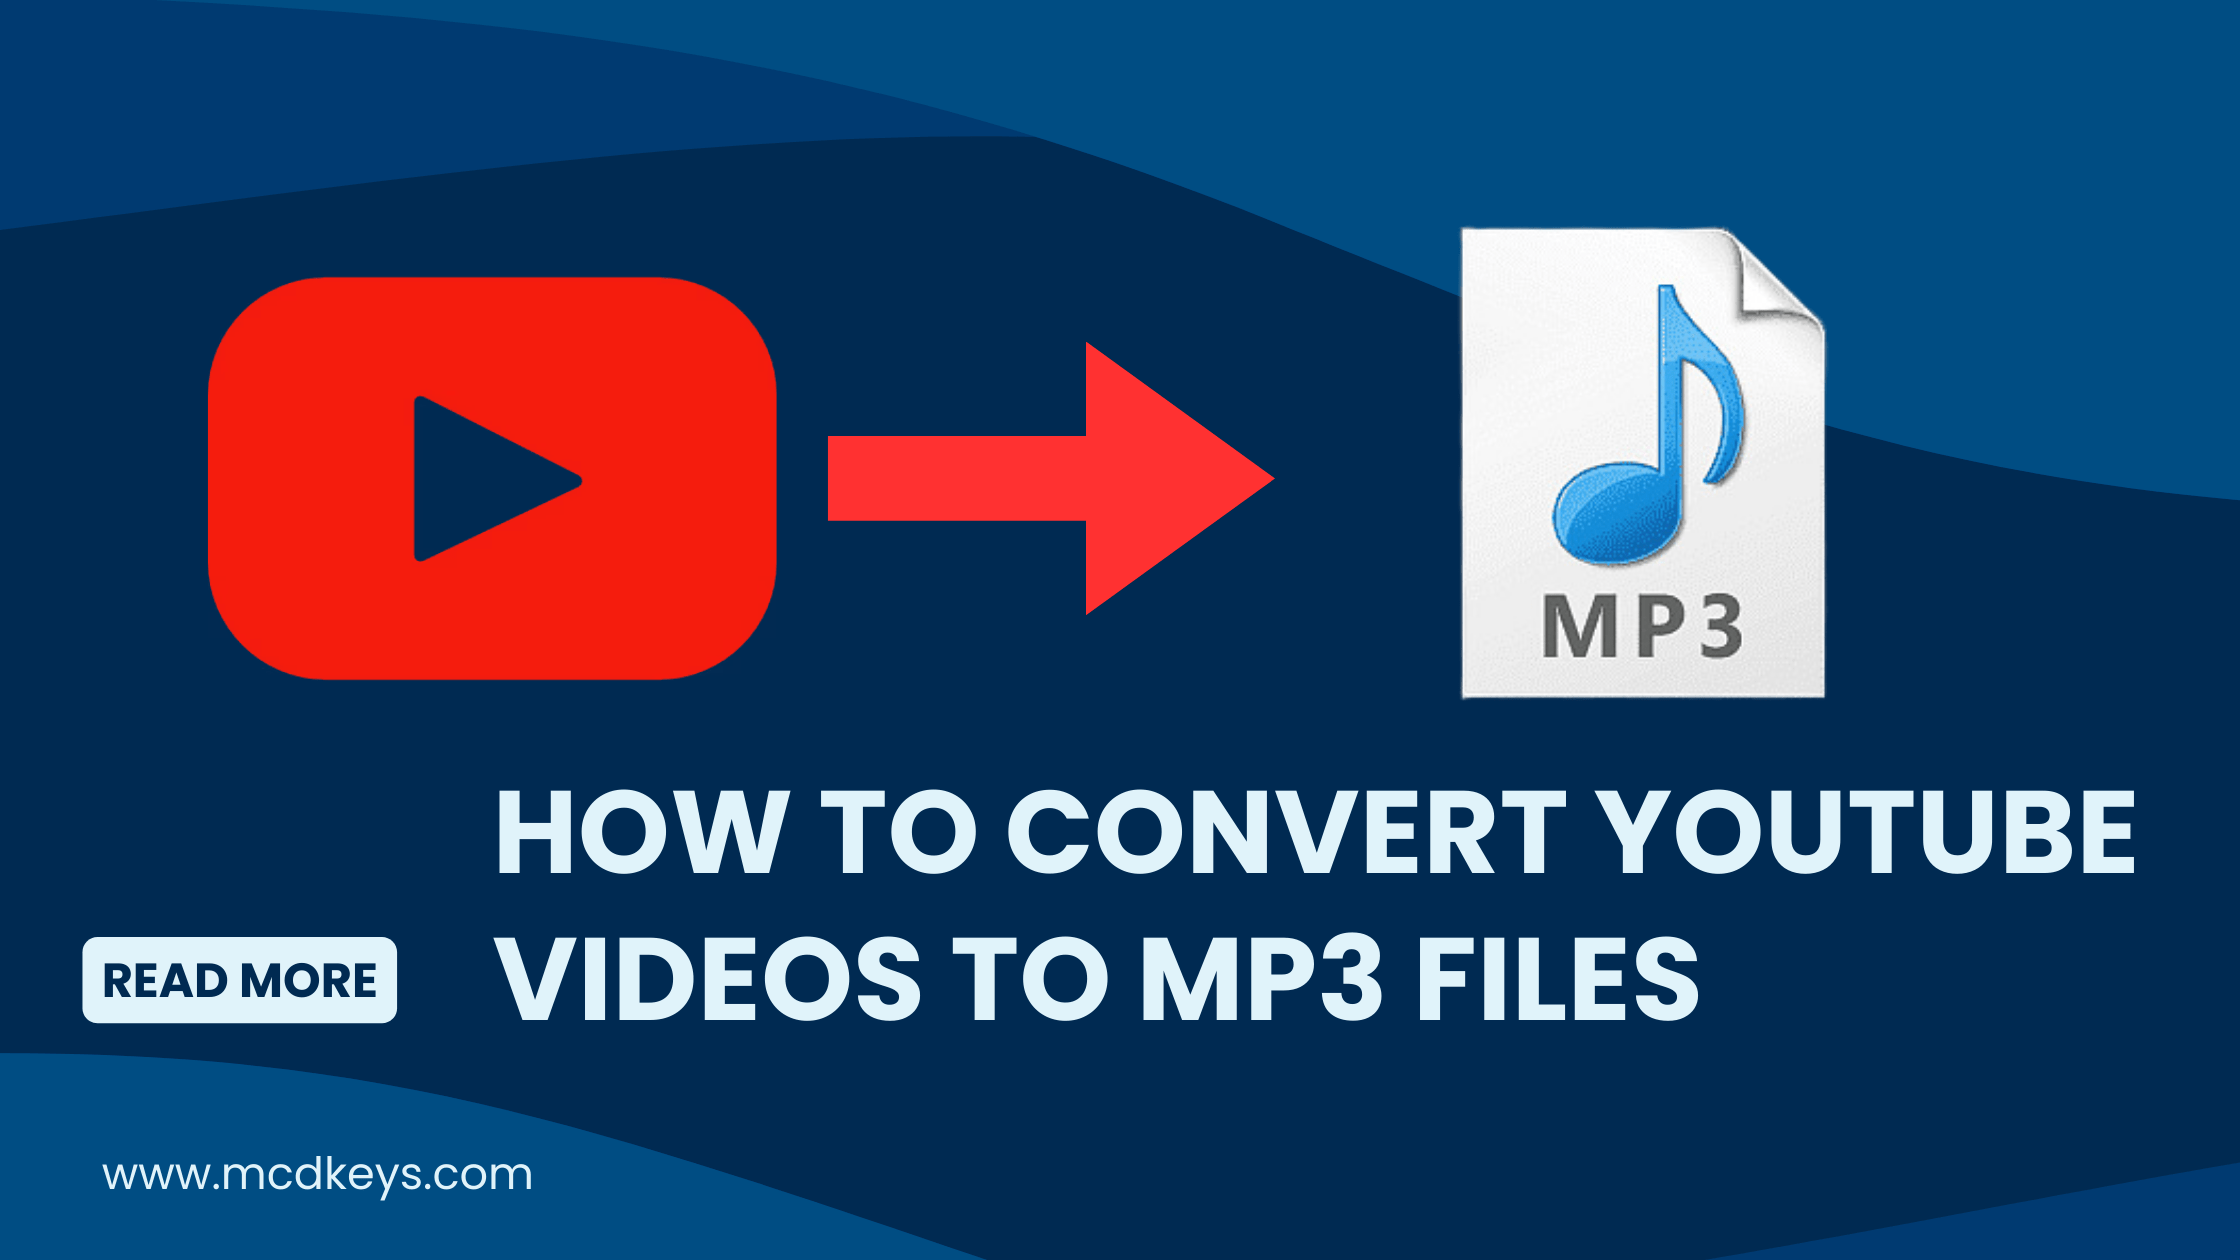 How to Convert YouTube Videos to MP3 Files